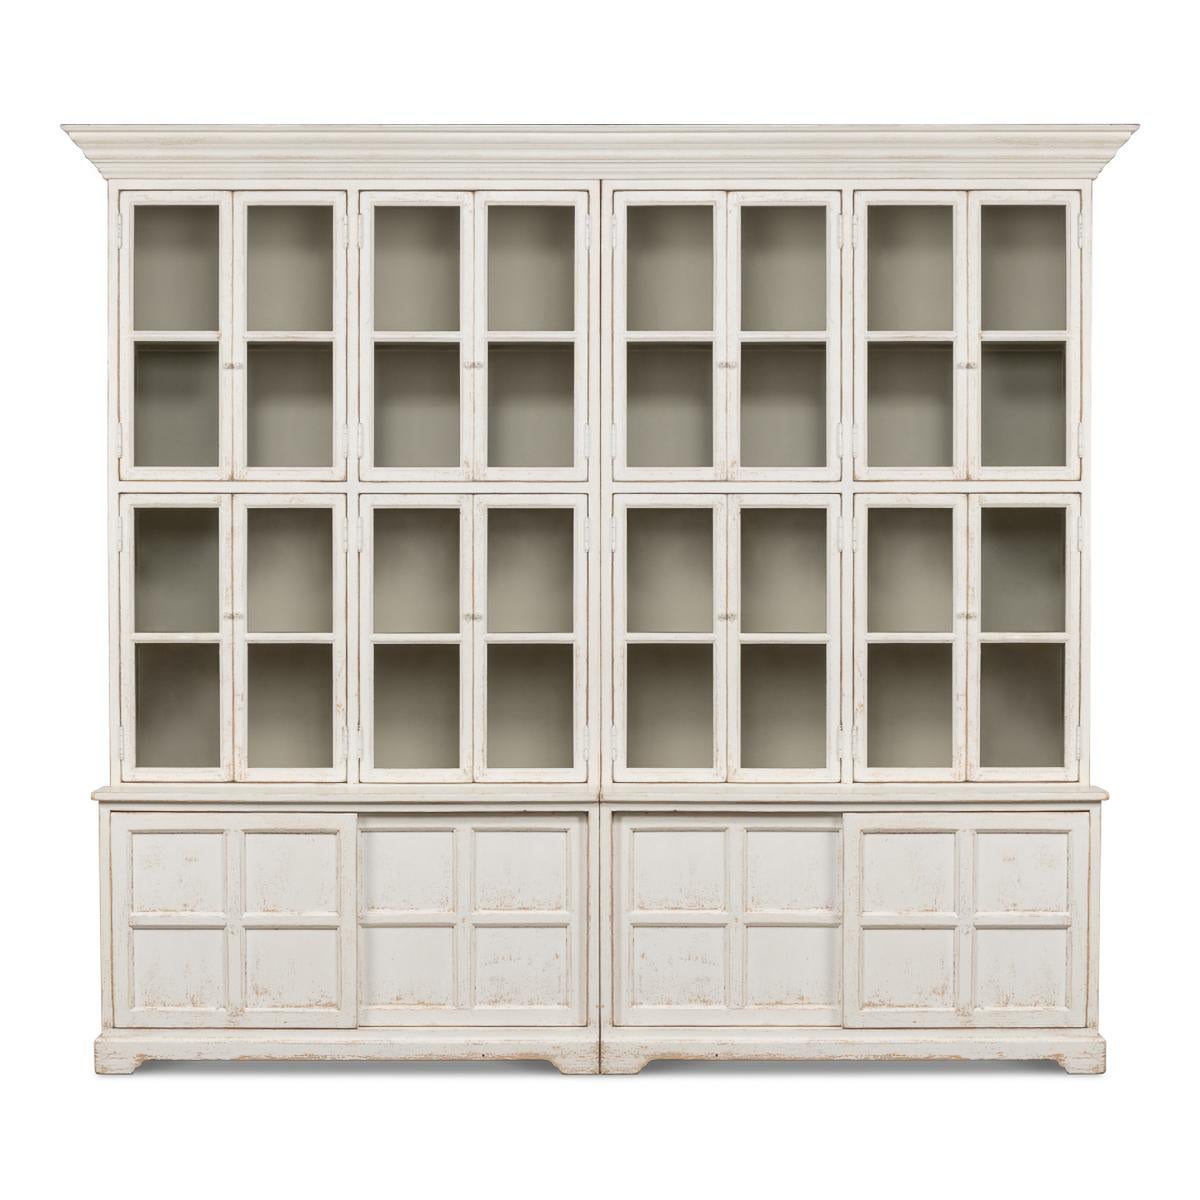 Country Painted bookcase with 12 sections, a molded cornice above glass door display storage bacinets with fixed shelves, the bottom with sliding doors. The white-painted pine cabinet has a hand-rubbed finish that is distressed and antique with a